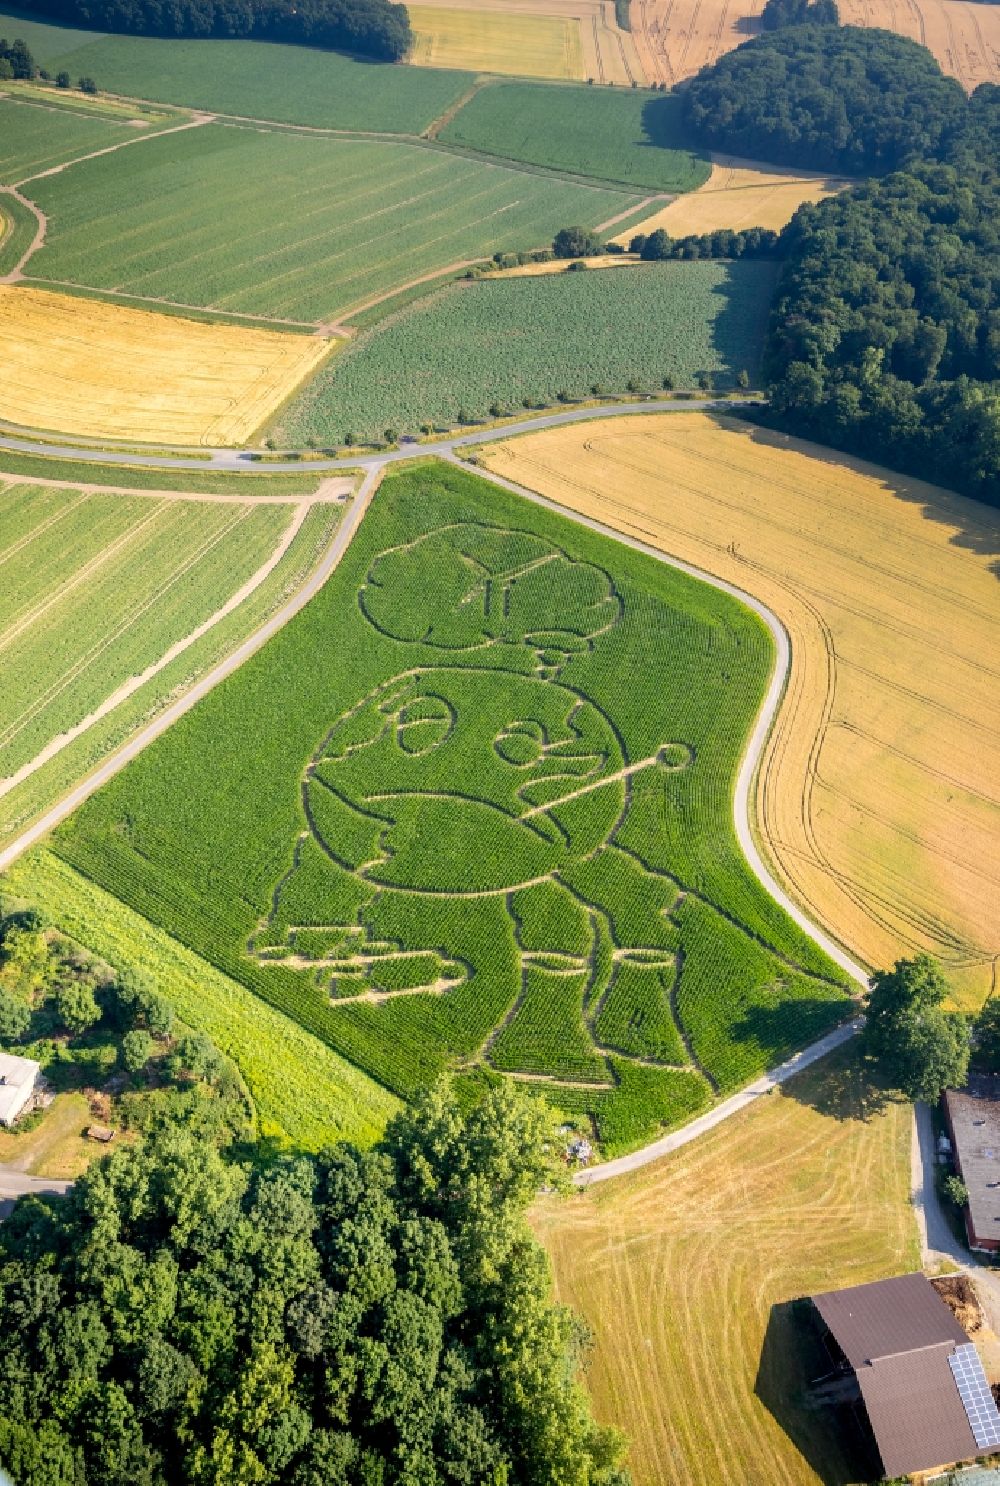 Aerial photograph Selm - Maze - Labyrinth with the outline of a globe in a field in the district Cappenberg in Selm in the state North Rhine-Westphalia, Germany. Farmer Benedikt Luenemann from Cappenberg took this year's global warming as a theme for his maize labyrinth